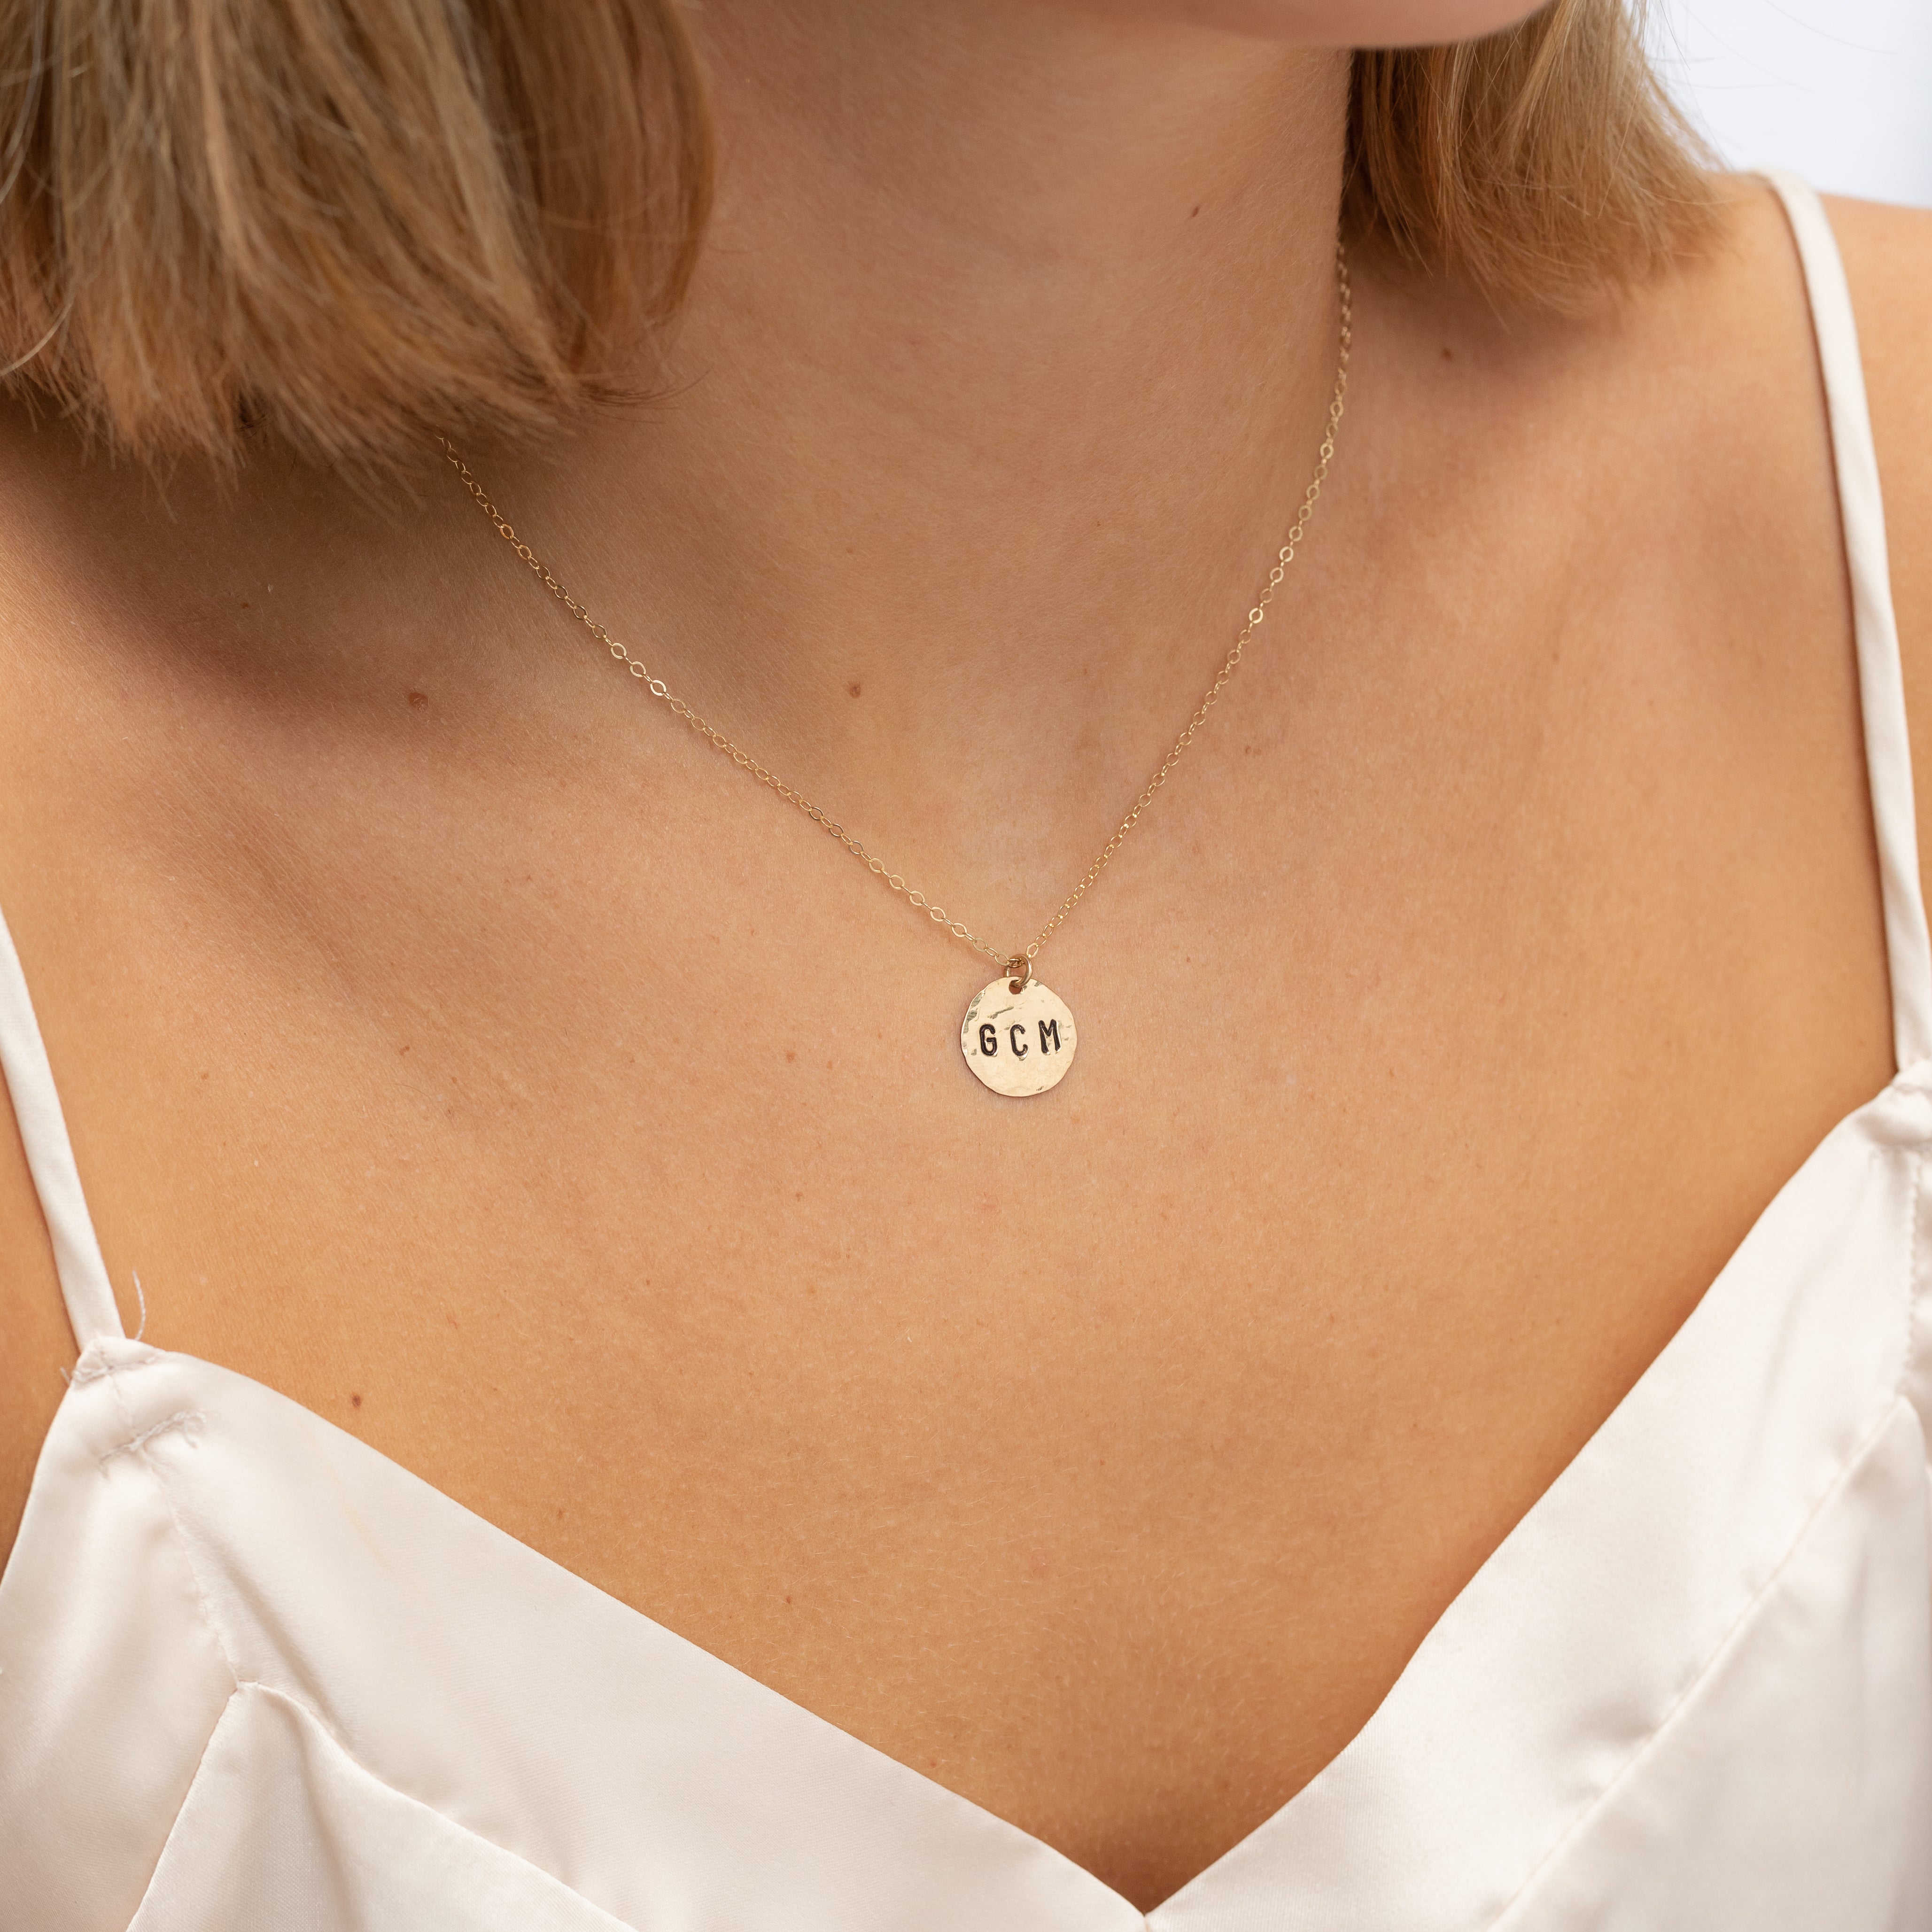 Medium size gold filled hammered circle with initials stamped onto it. On a gold chain. Shown on a woman's neck. 